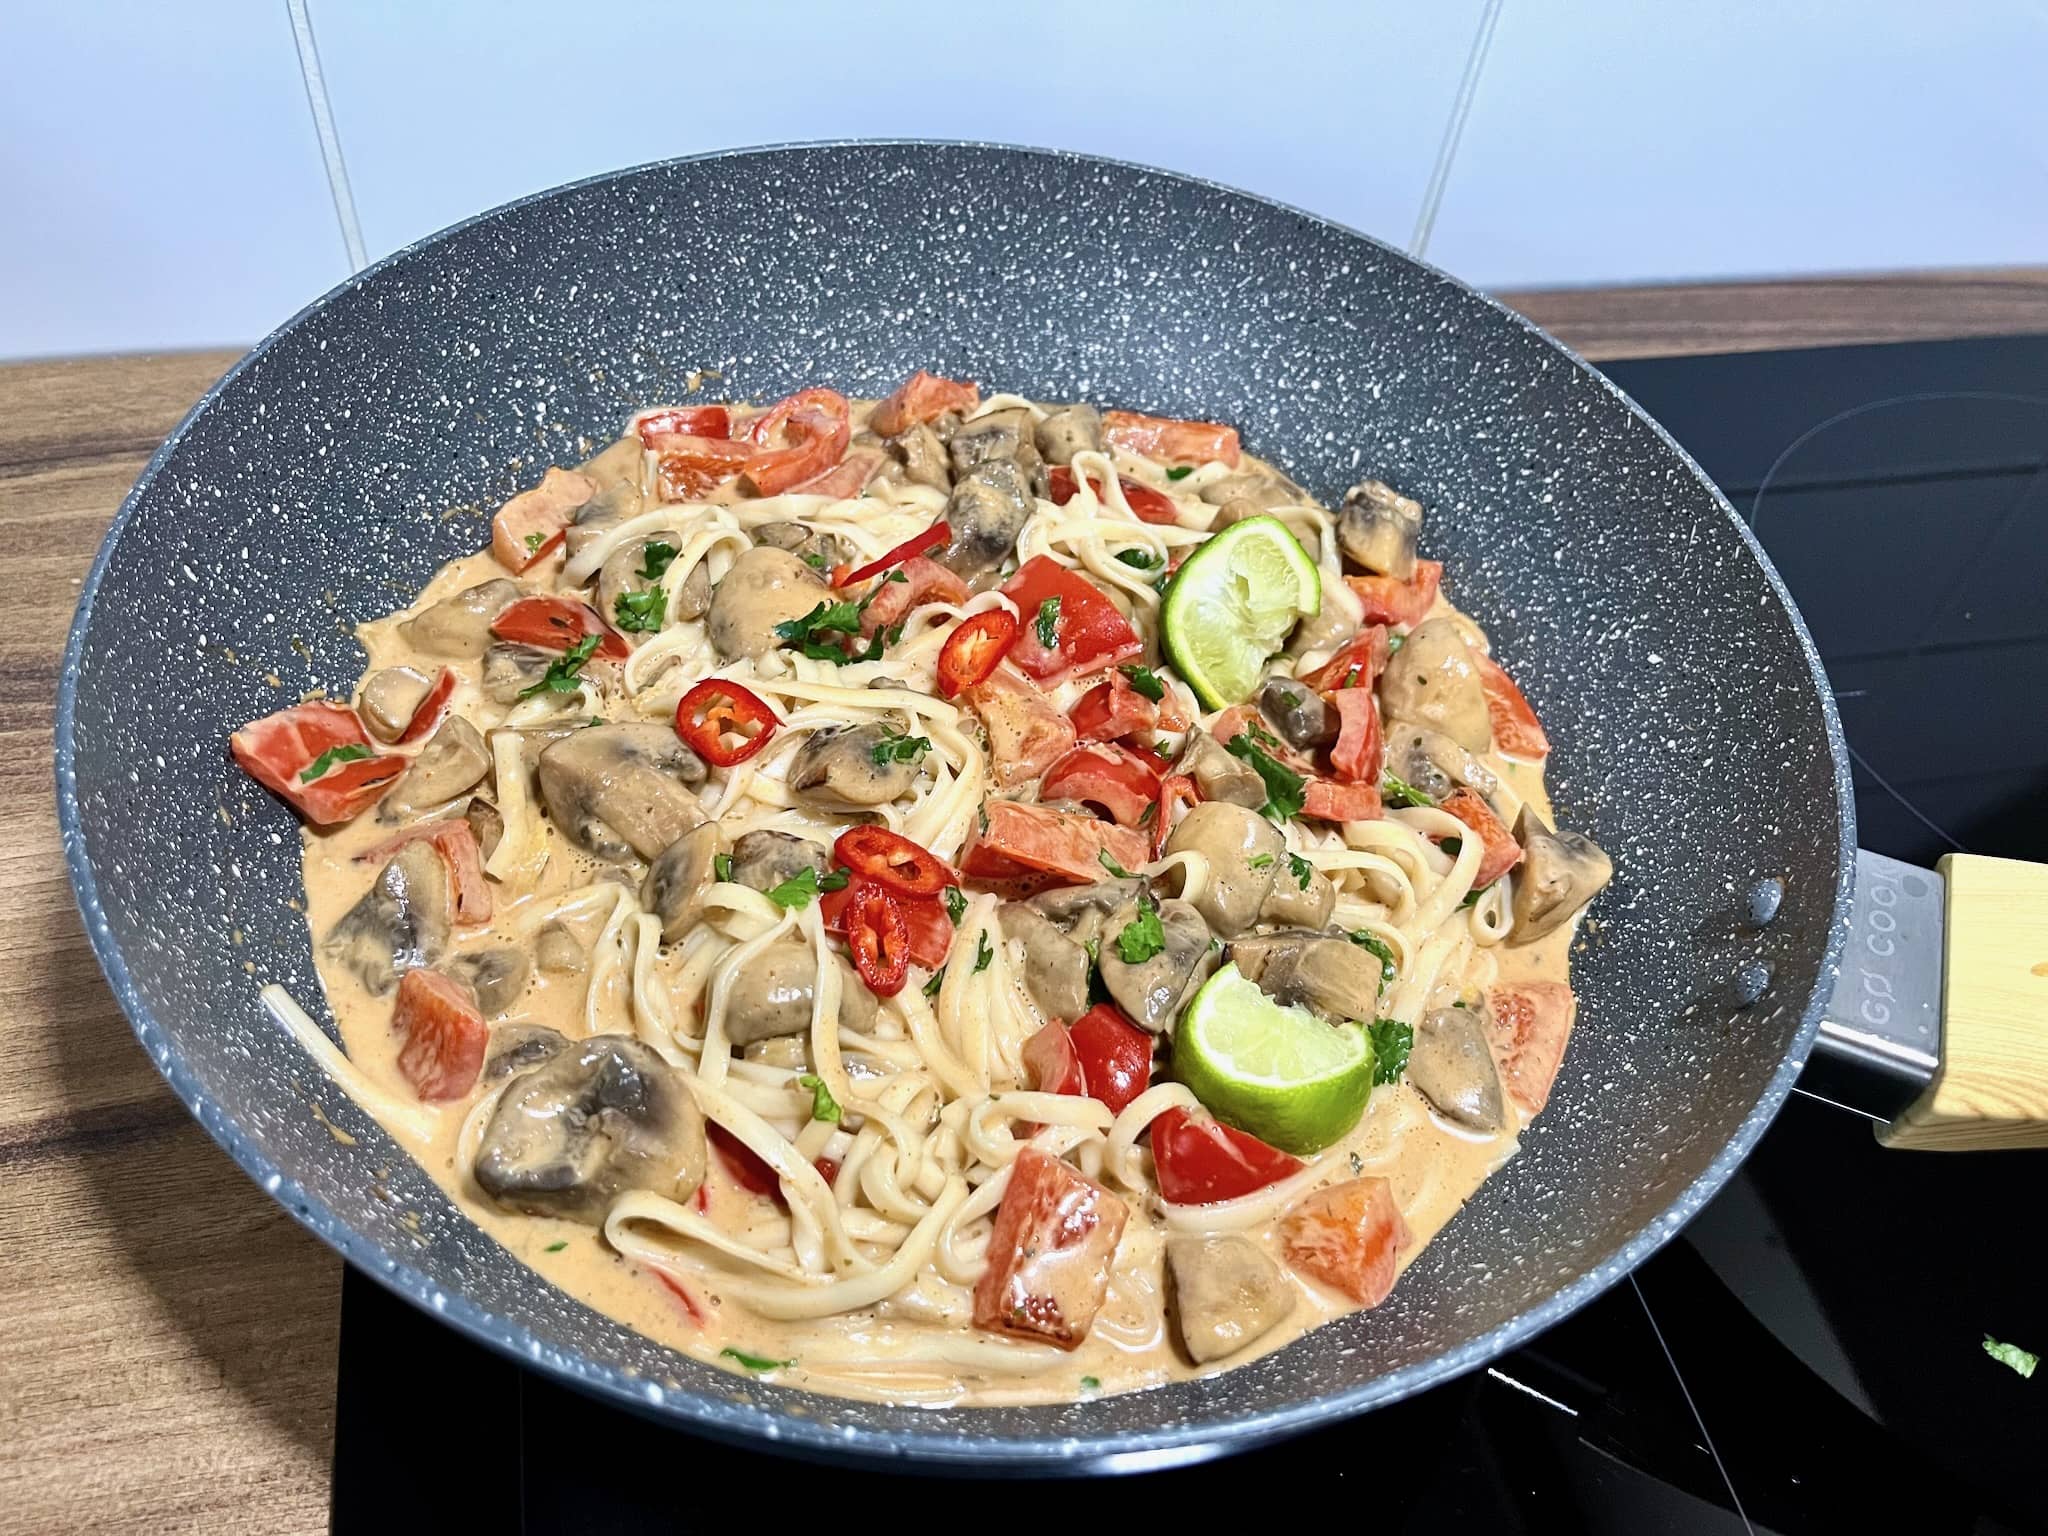 A pot of Veggie Thai Curry with Udon Noodles is ready to enjoy.